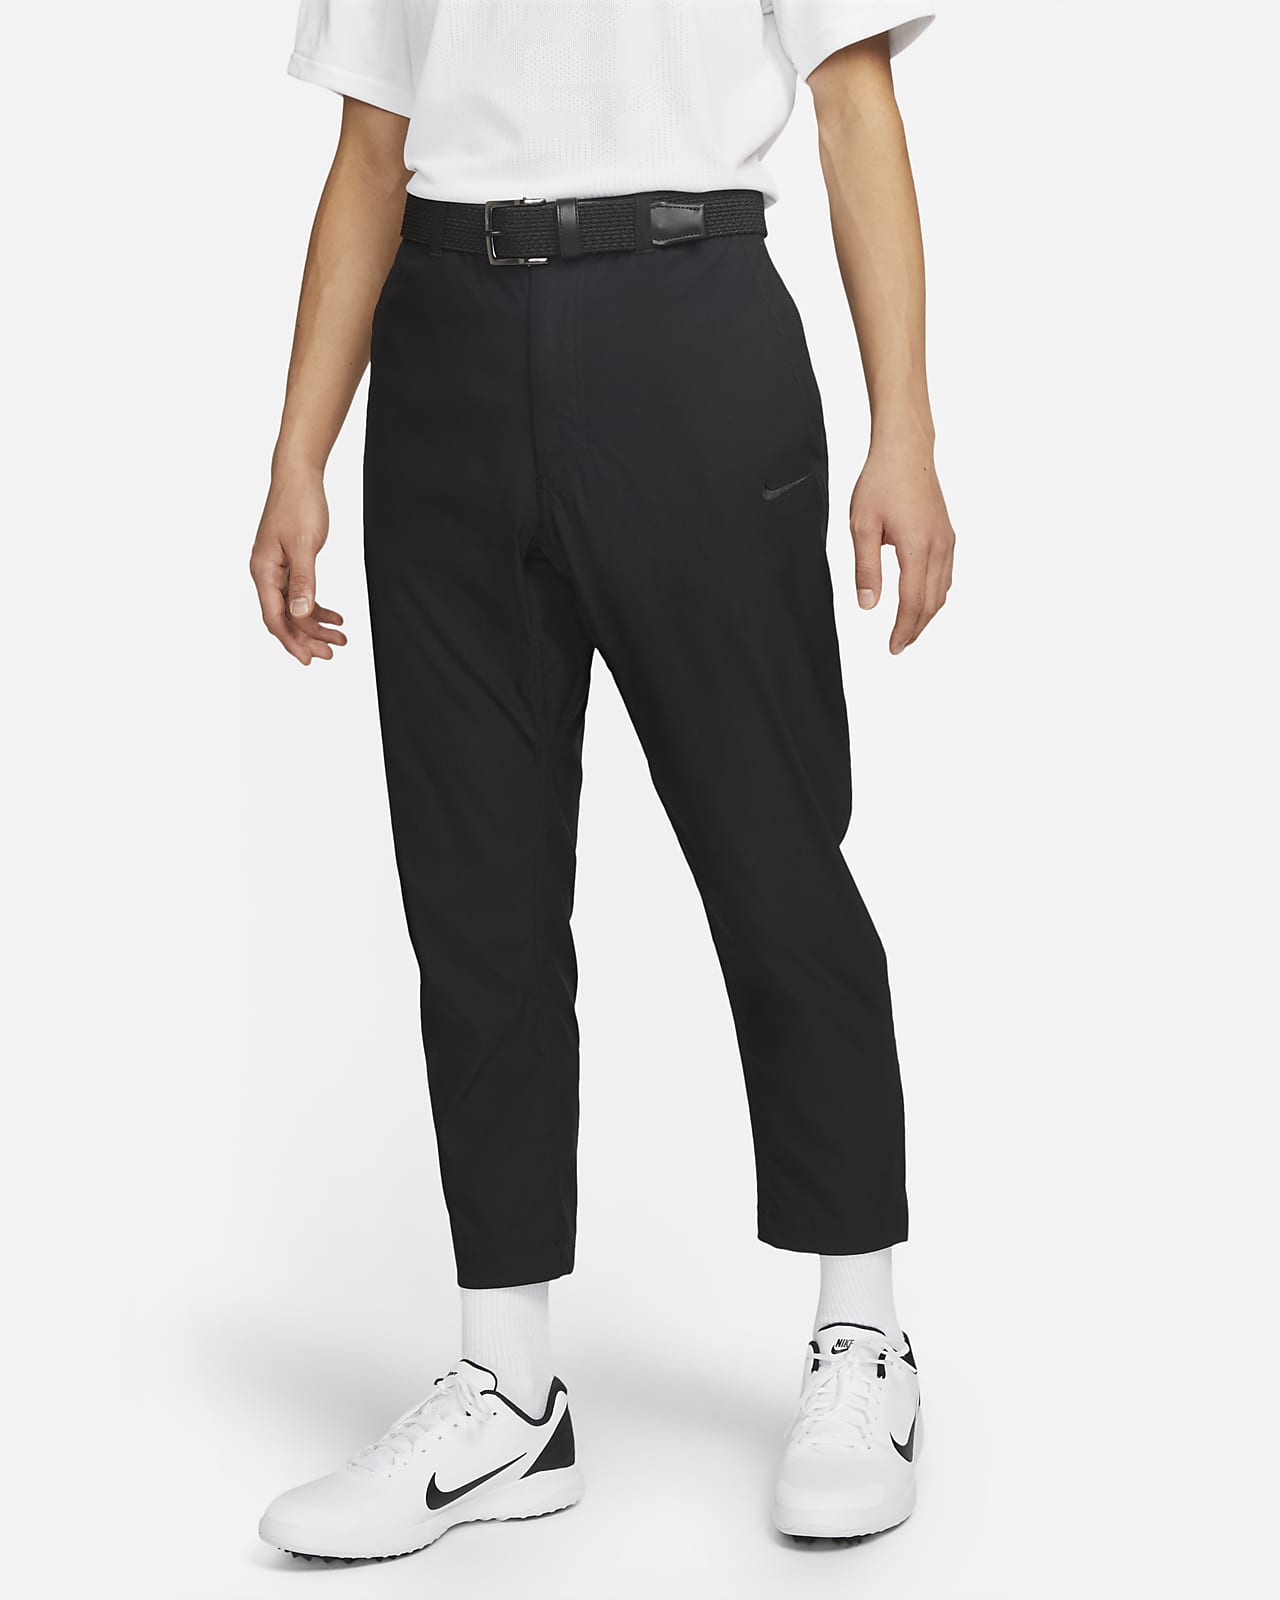 What are Nikes Best Golf Trousers Nike IN